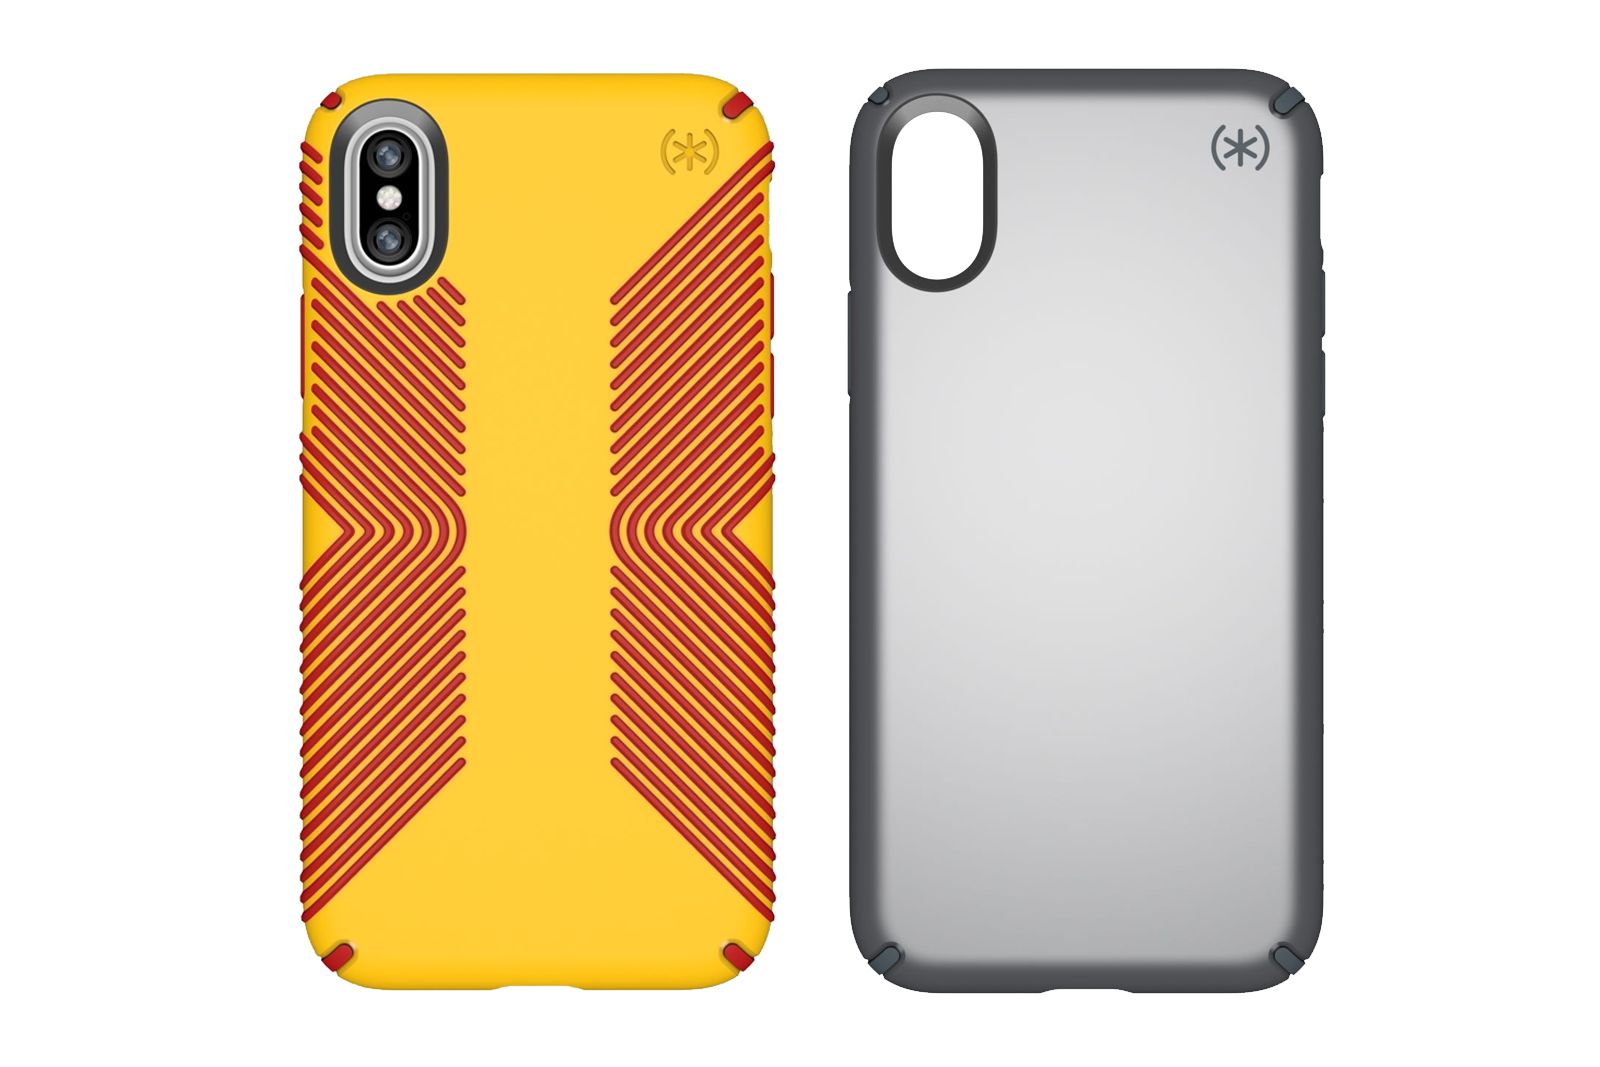 Best Iphone Xs And Xs Max Cases Protect Your New Apple Smartphone image 11